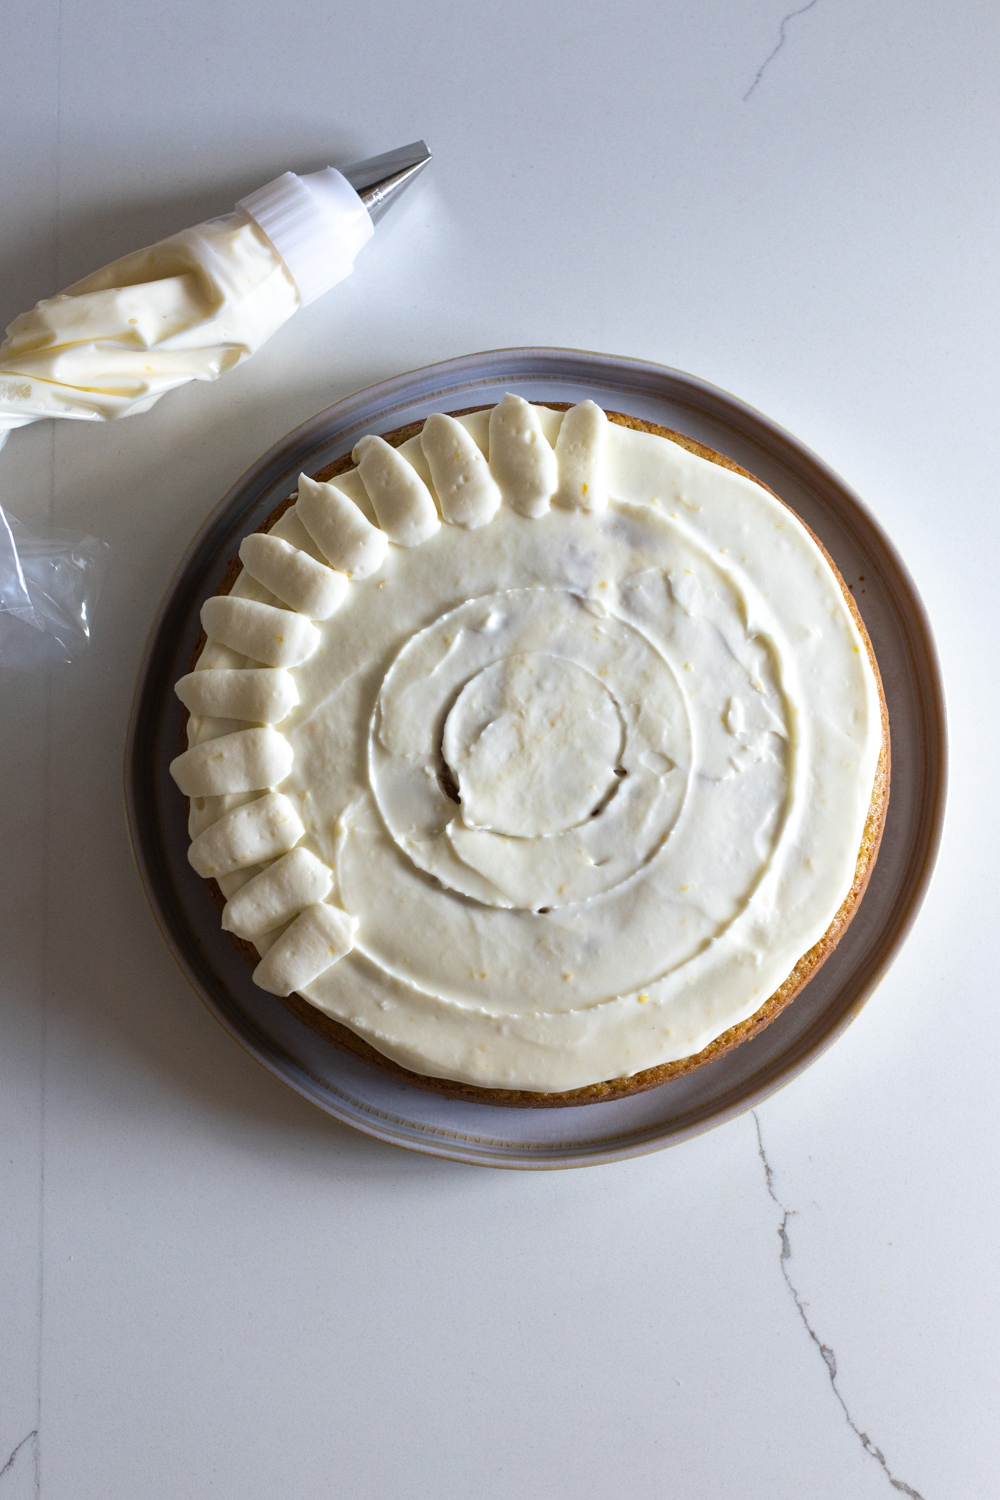 Decorating Artichoke Olive Oil Cake with Lemon Cream Cheese Frosting